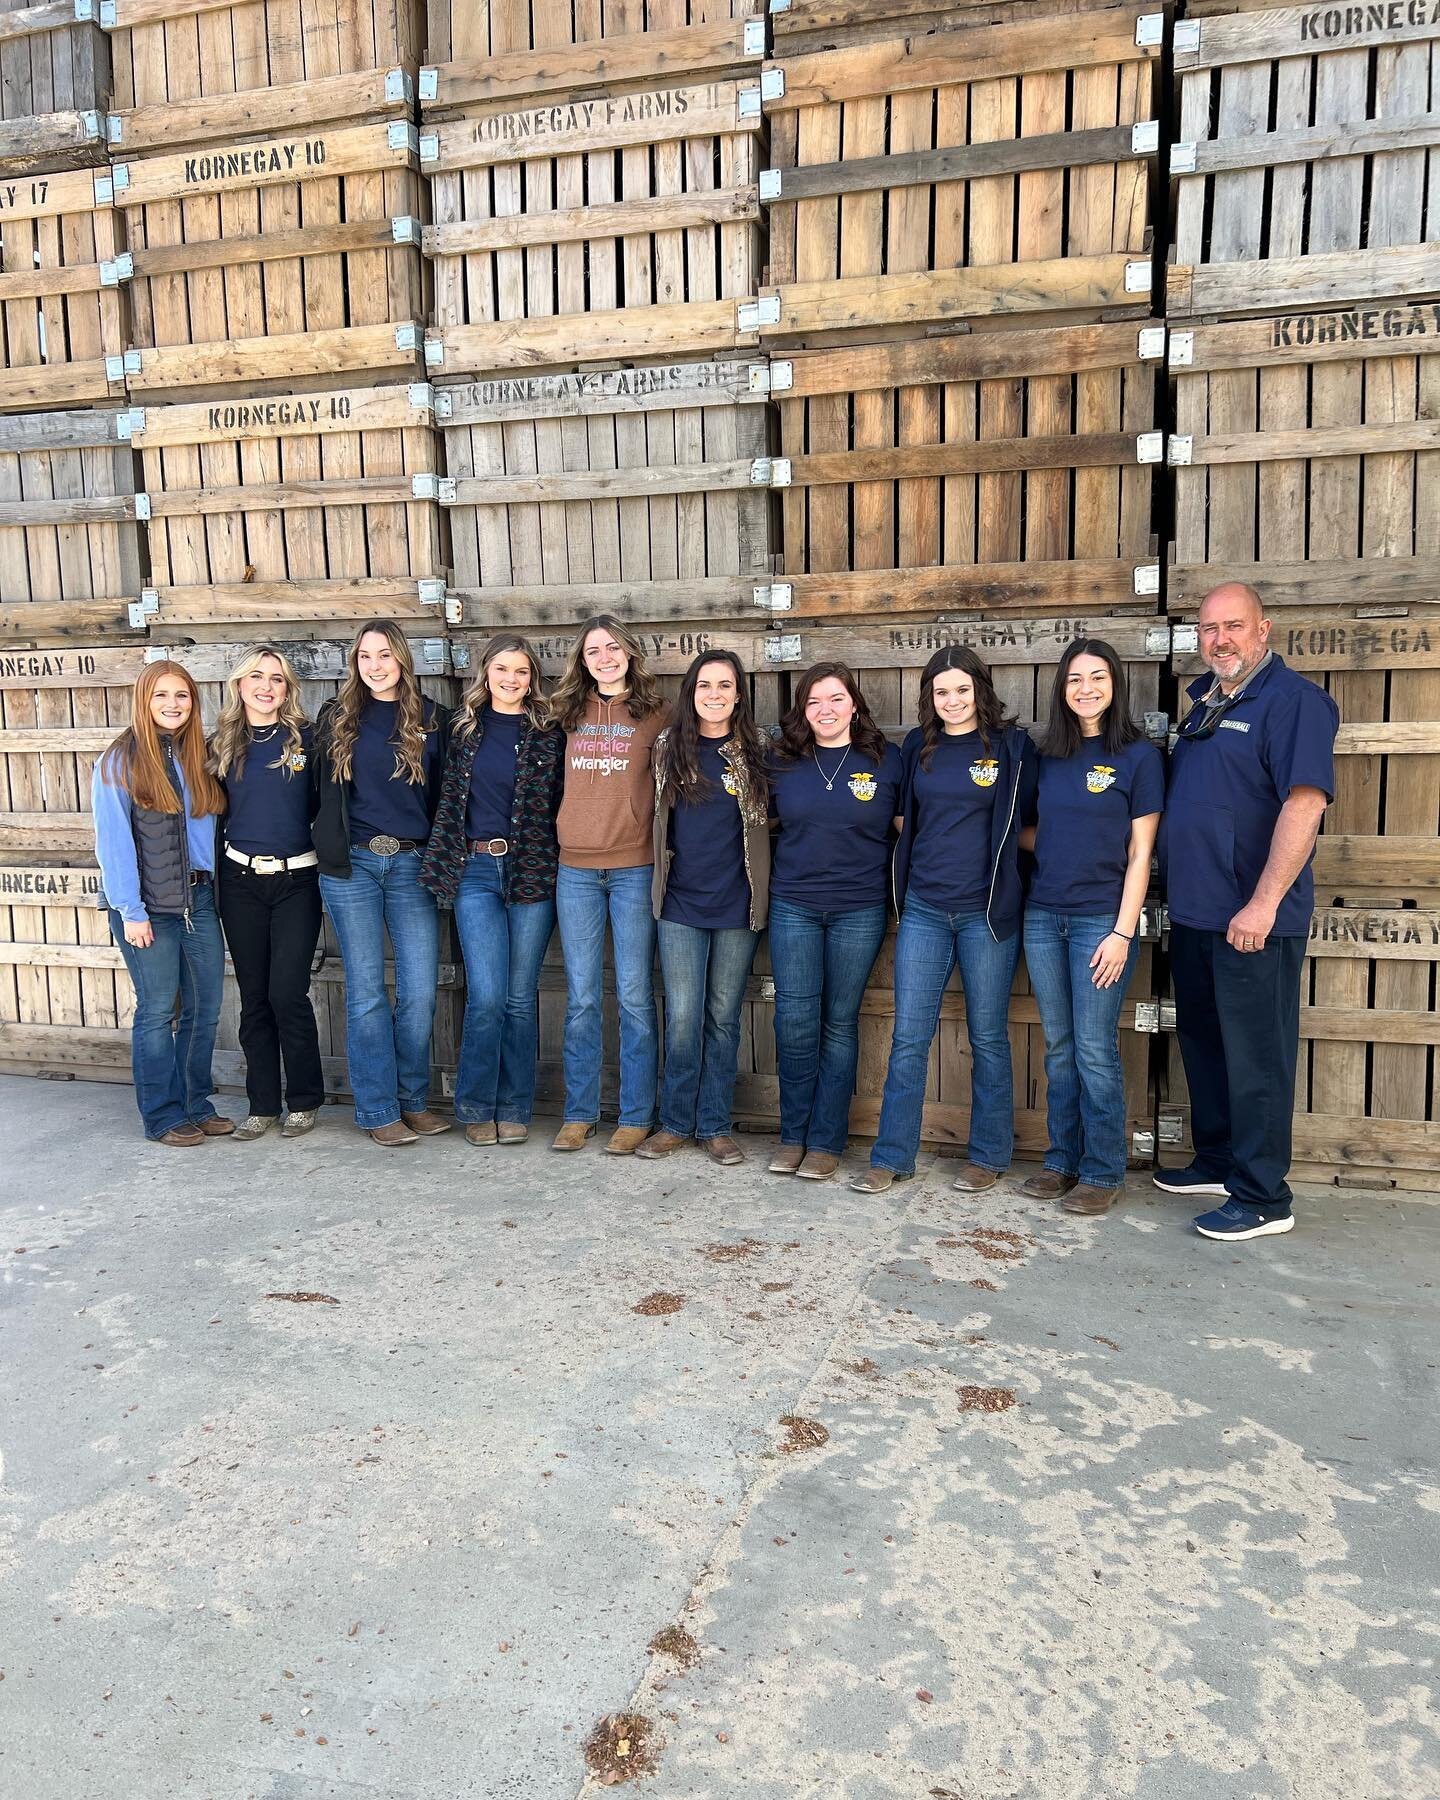 .

Enjoyed hosting this group from @chase_ffa today as they were on their way home after an FFA competition at @officialumo 🏆 

We talked #sweetpotato production, harvest, storage, packing and marketing as well as food safety and traceability practi